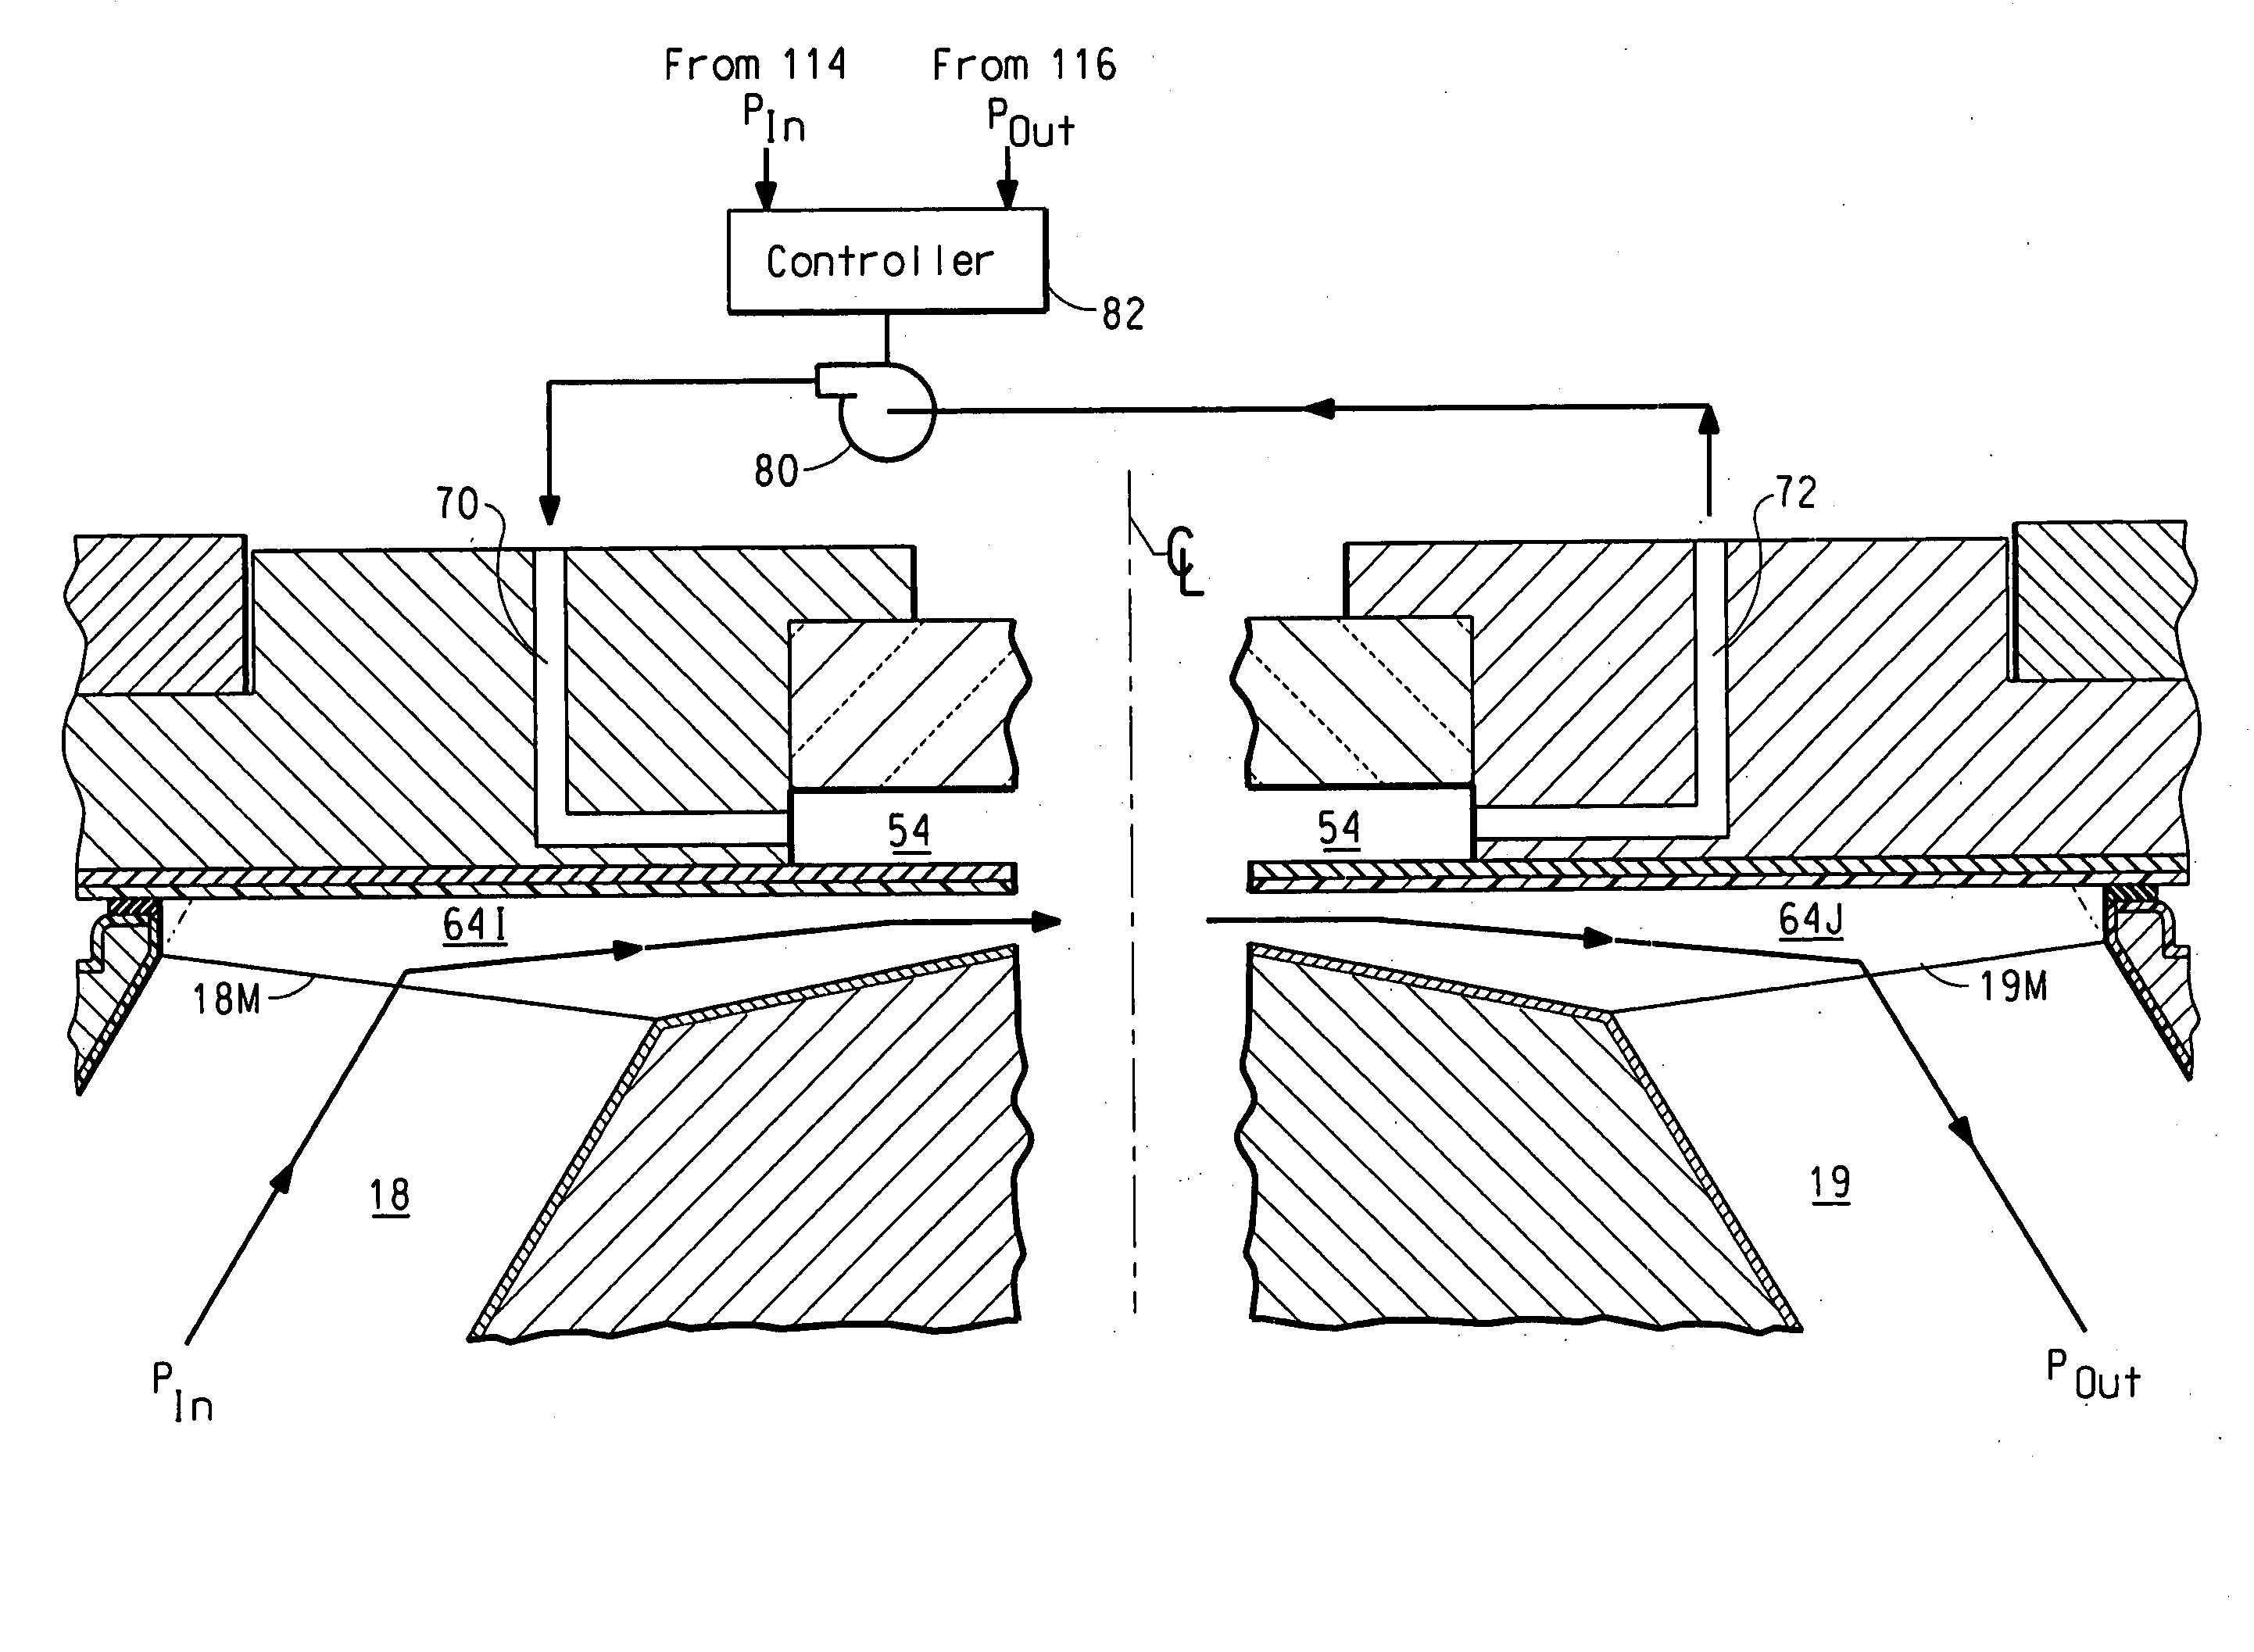 Probe apparatus for measuring a color property of a liquid